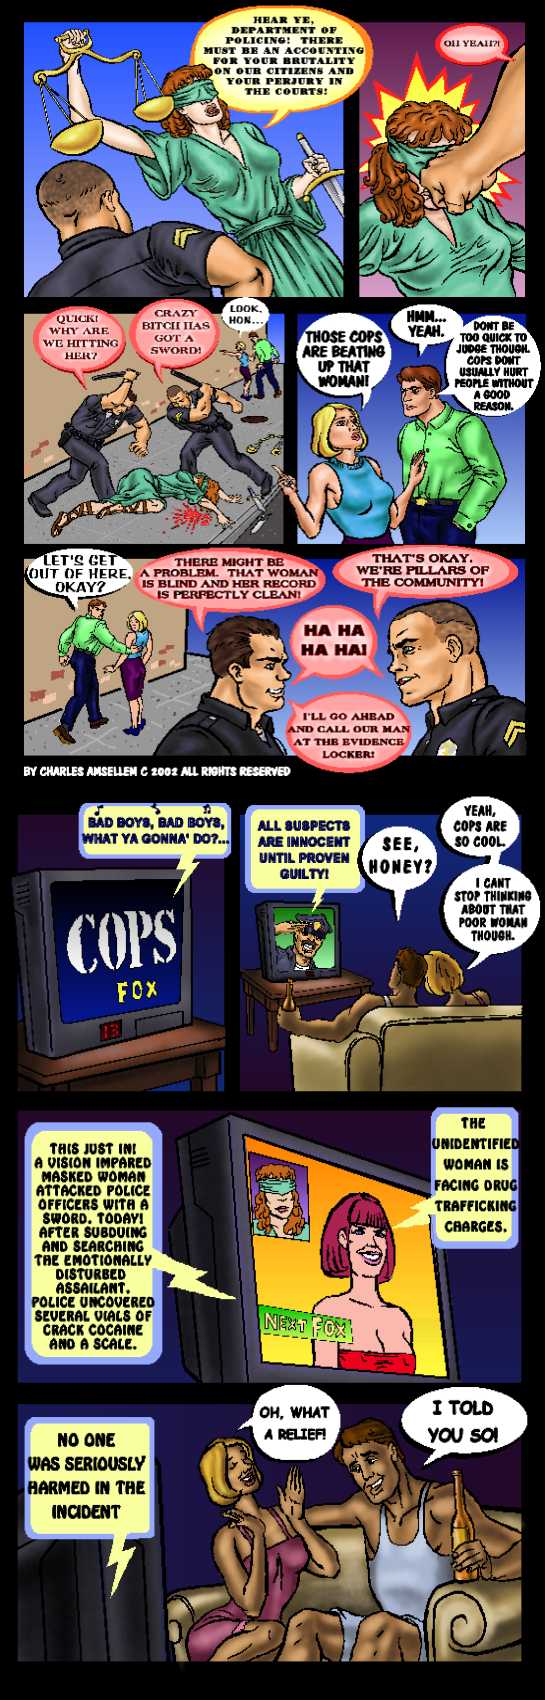 POLICE STATE by char...